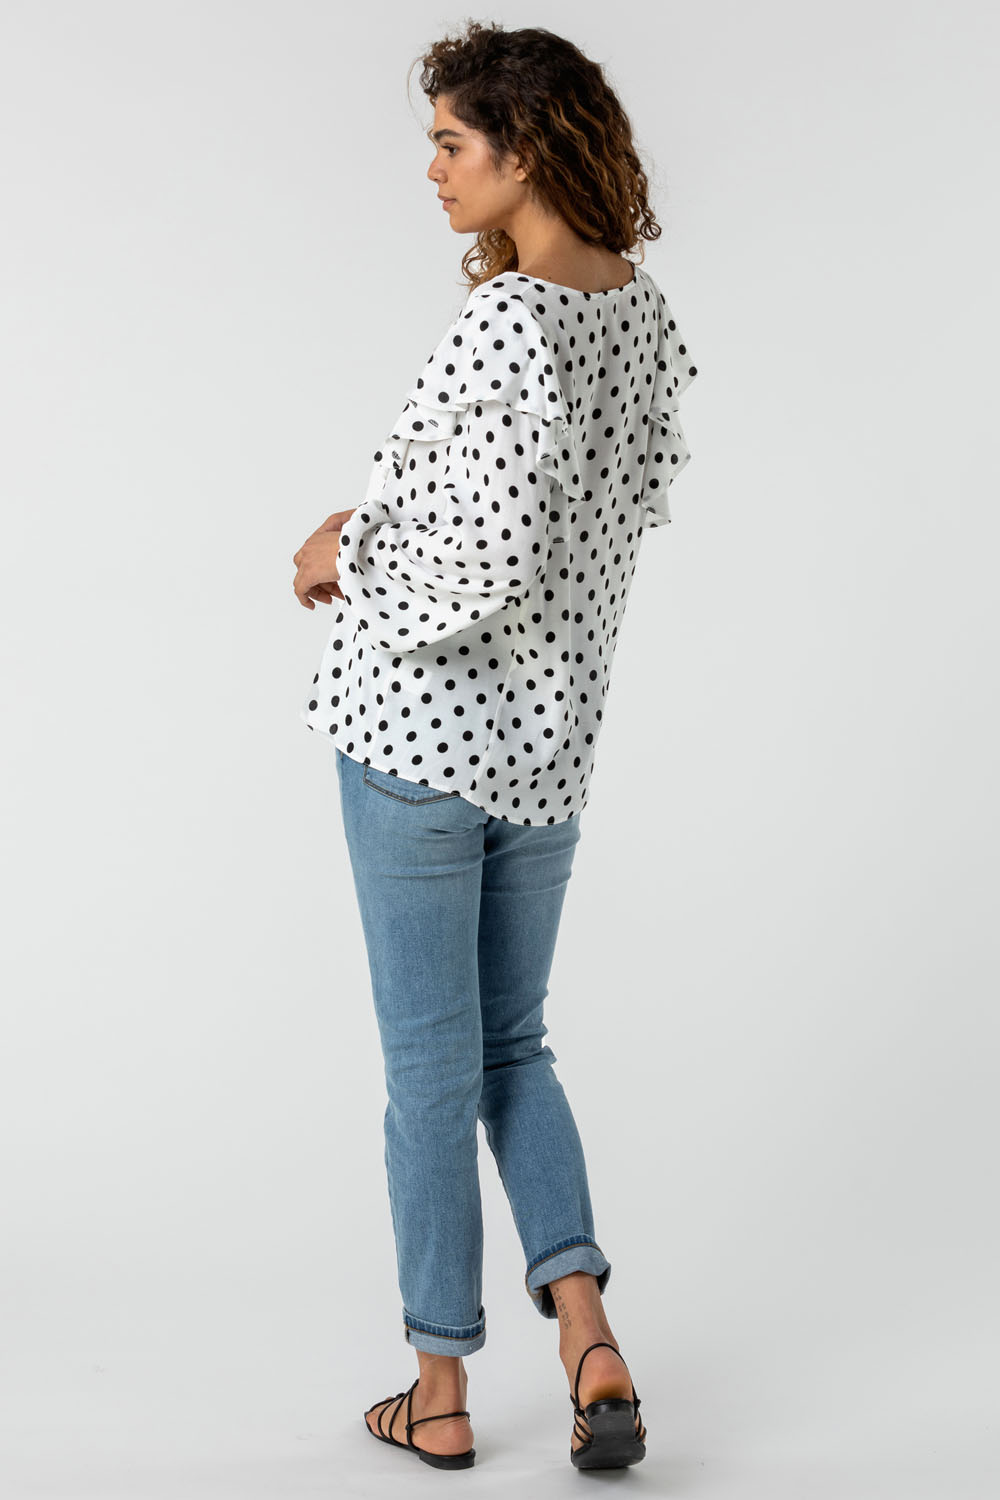 Ivory  Spot Print Frill Sleeve Top, Image 2 of 4